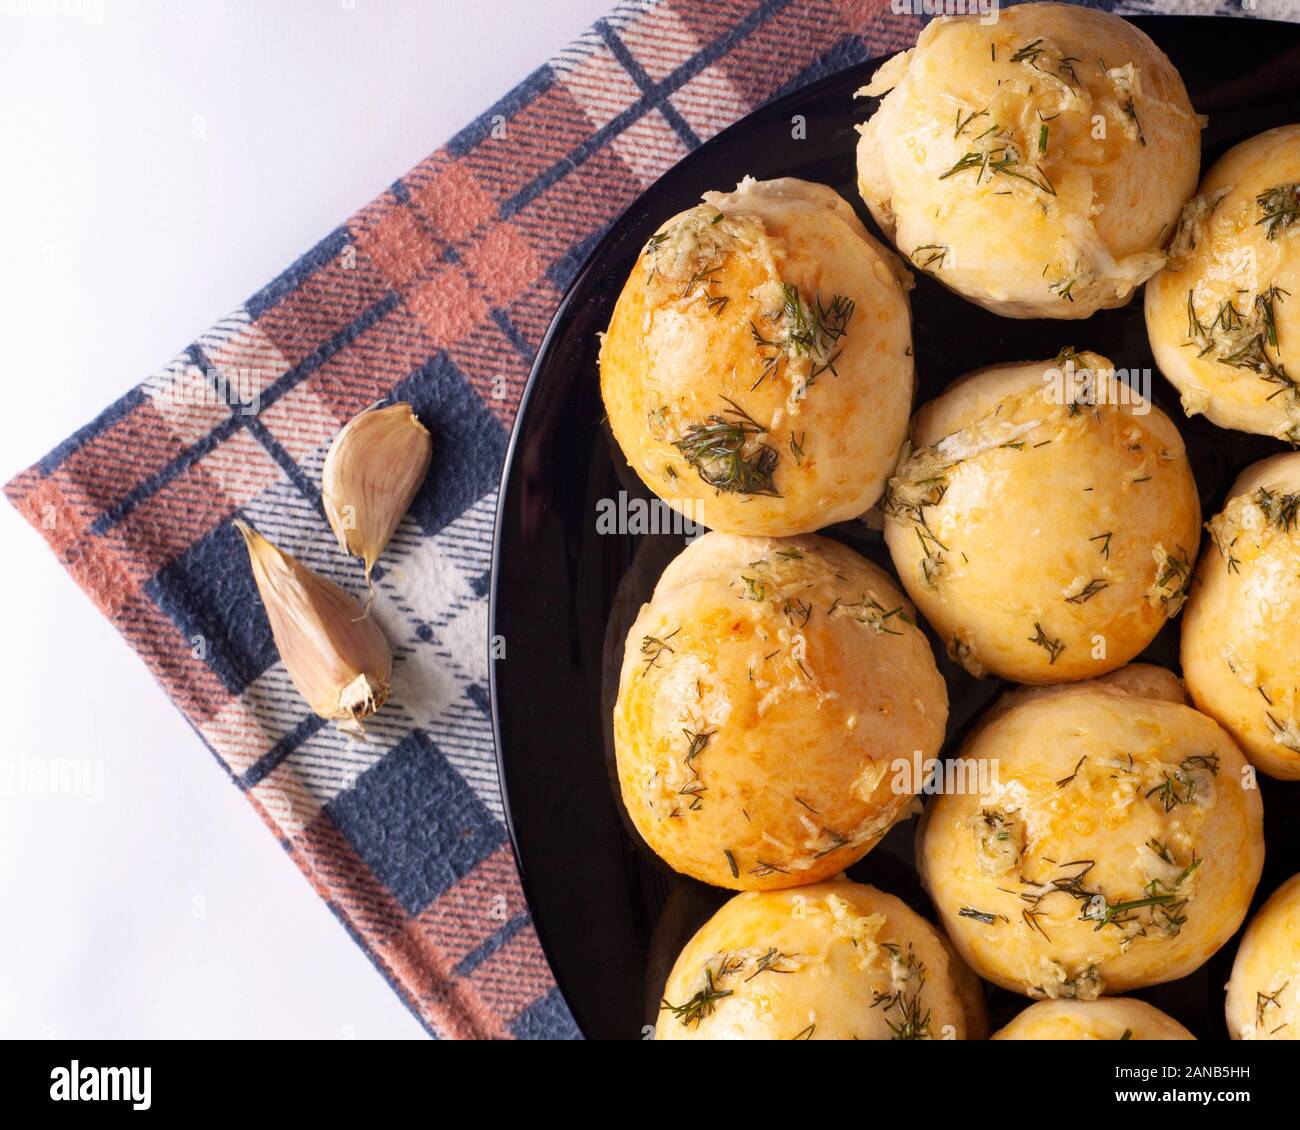 garlic baked goods .baked buns on a towel top view. Stock Photo